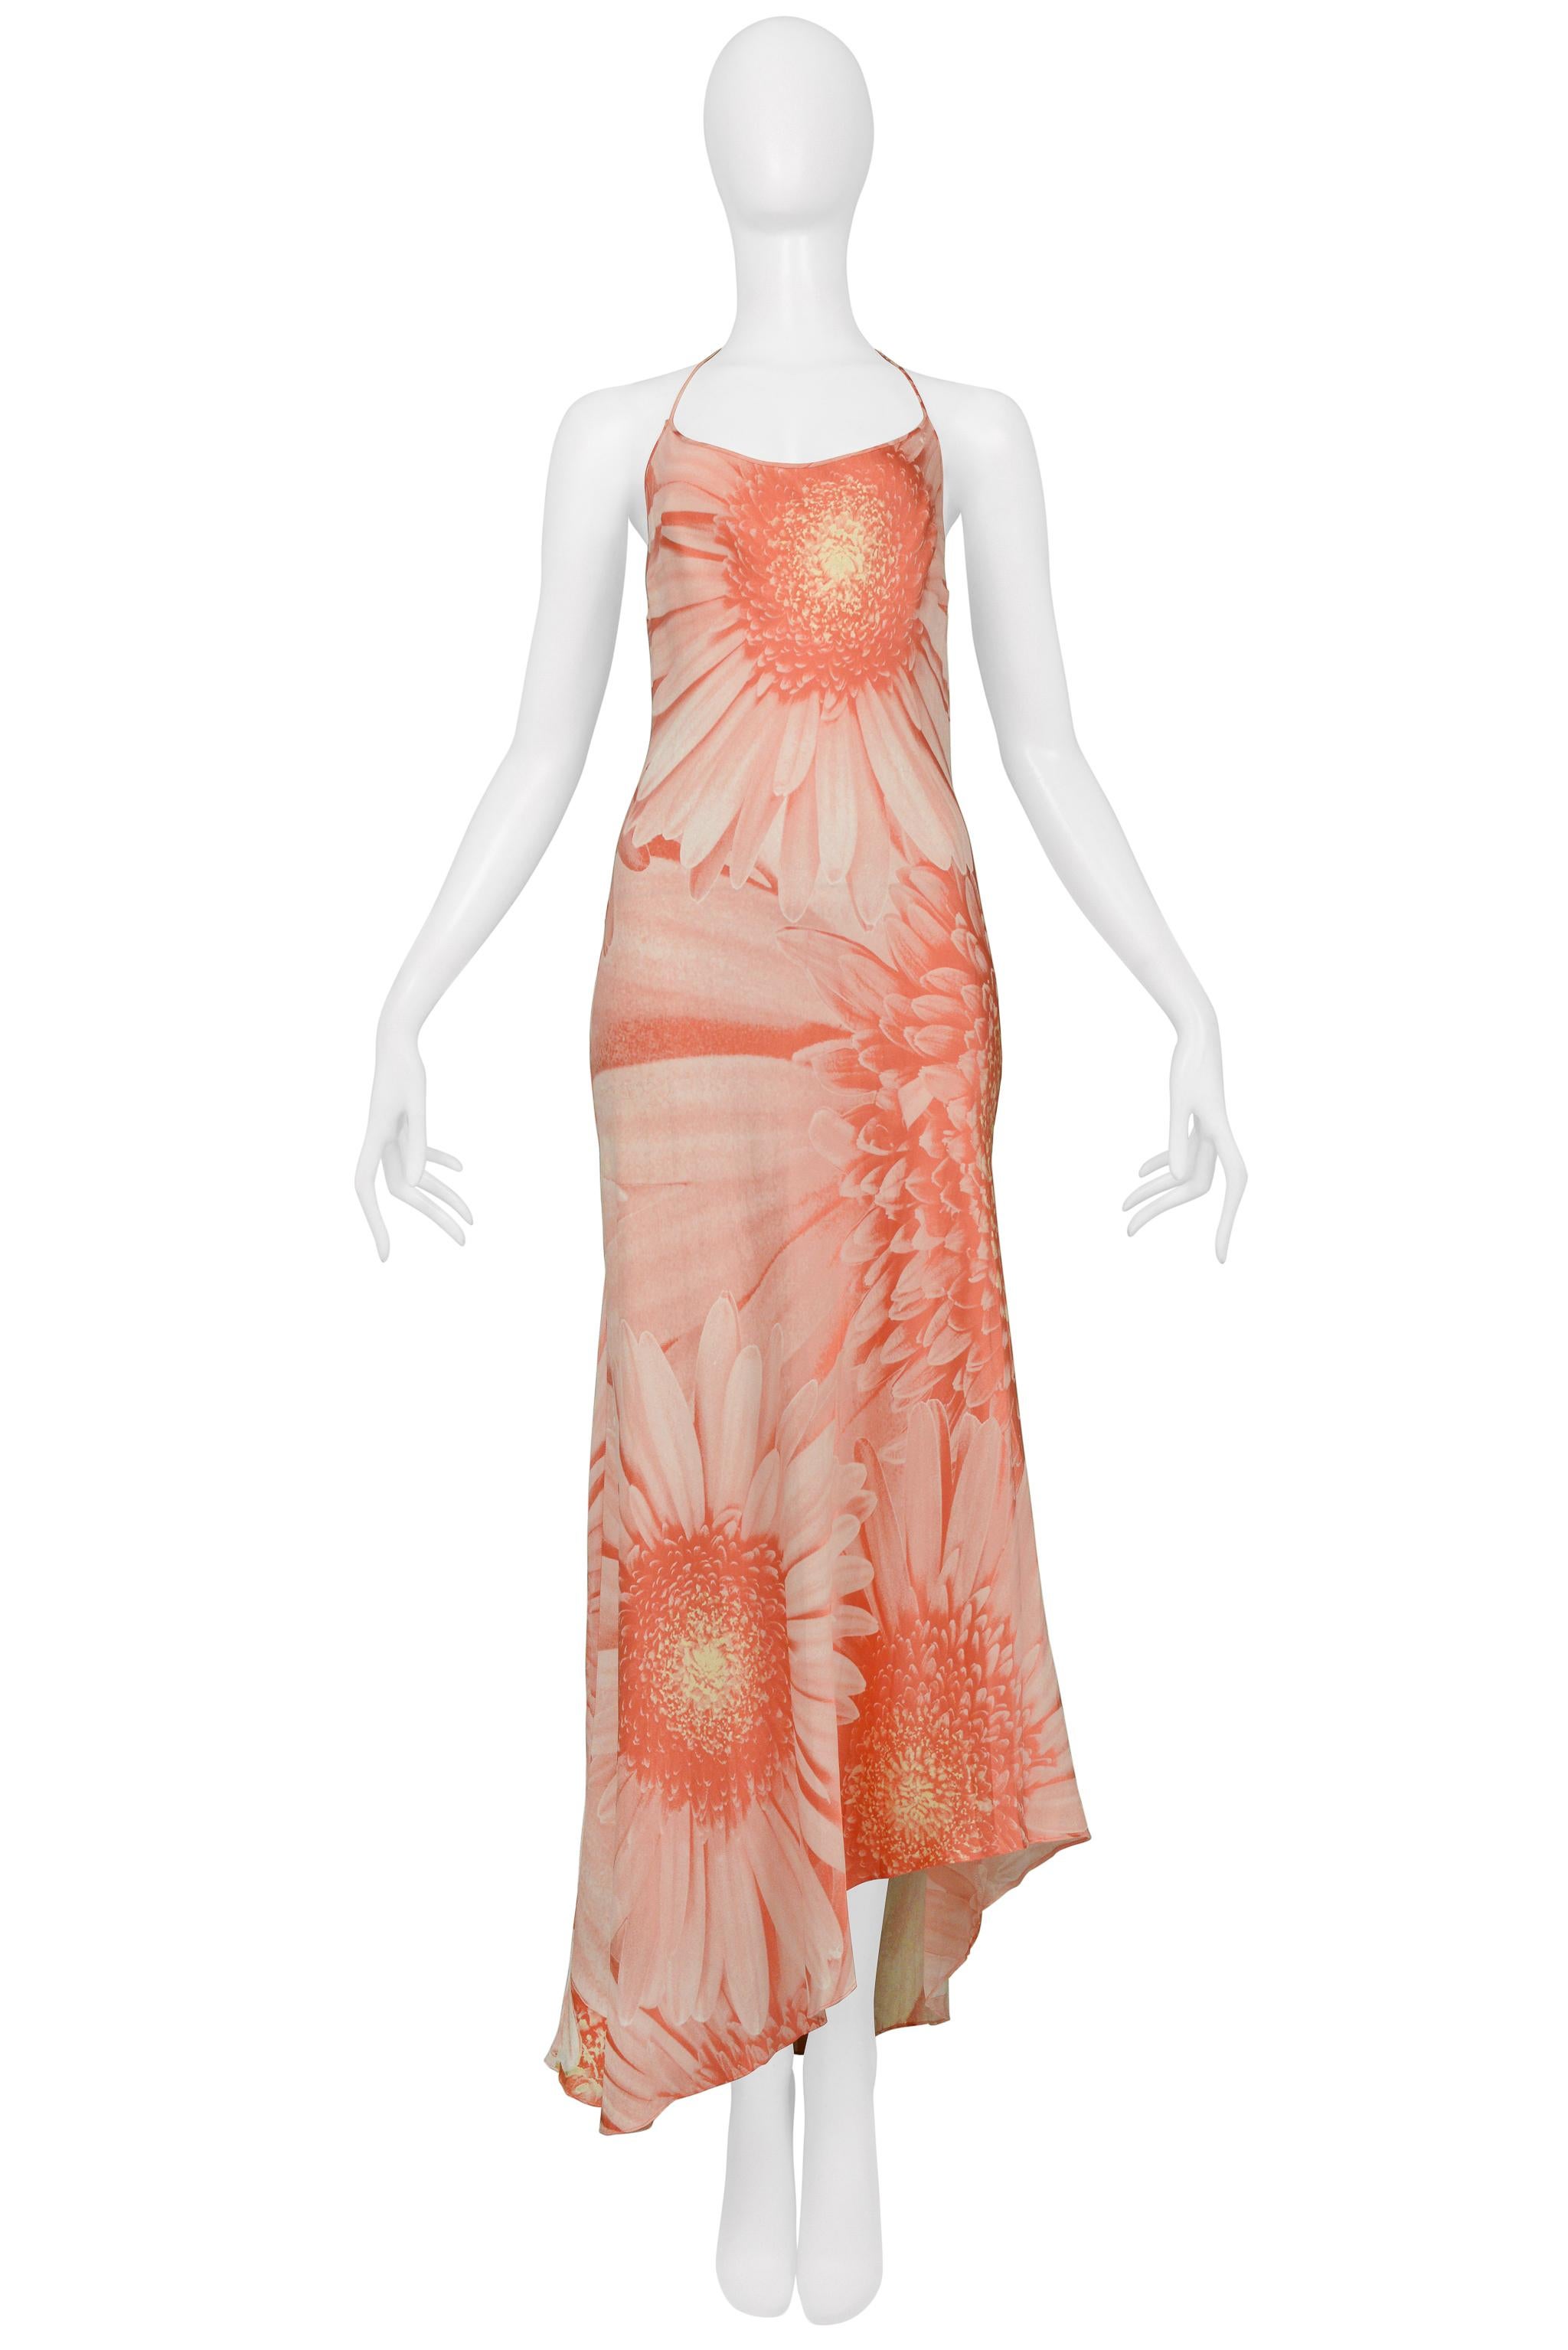 Resurrection Vintage is excited to offer a vintage Roberto Cavalli pink slip dress featuring decorative daisy floral pattern, open back, tie closure with gold beads, asymmetrical hem, and maxi dress length. 

Roberto Cavalli
Size Medium
100%